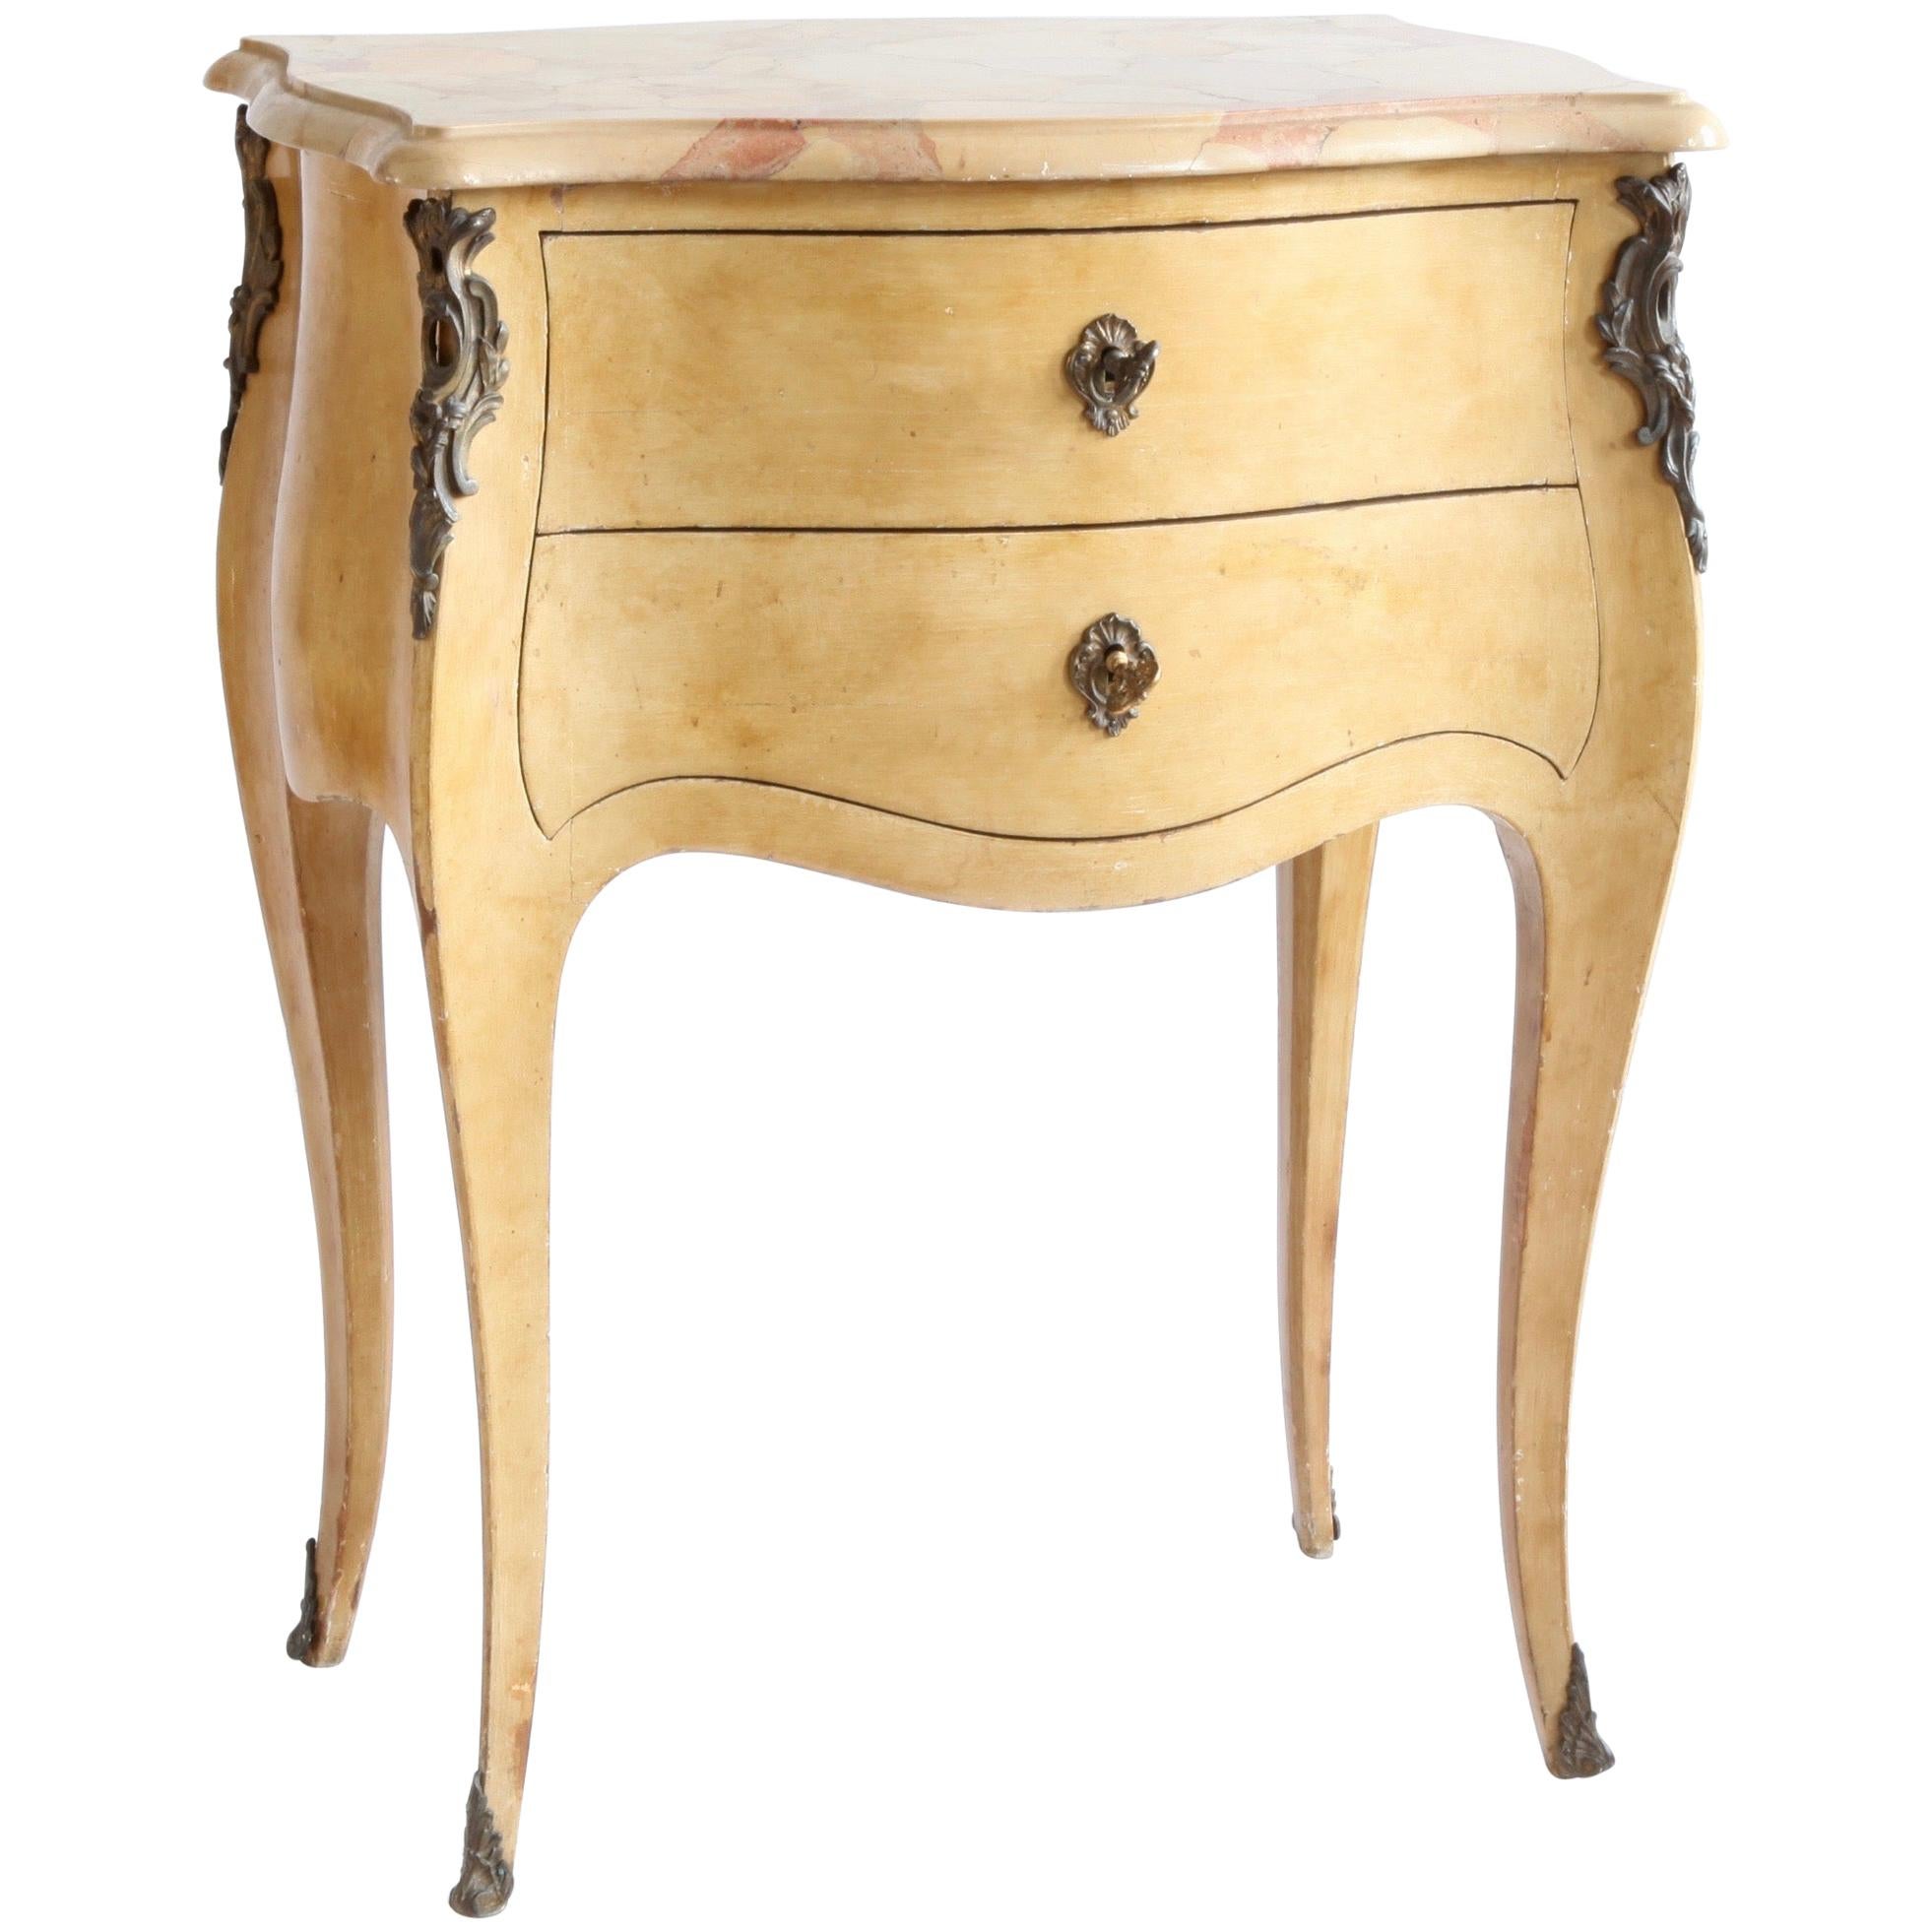 Antique French Louis XV Style Bedside Table or Small Commode in Yellow Ochre